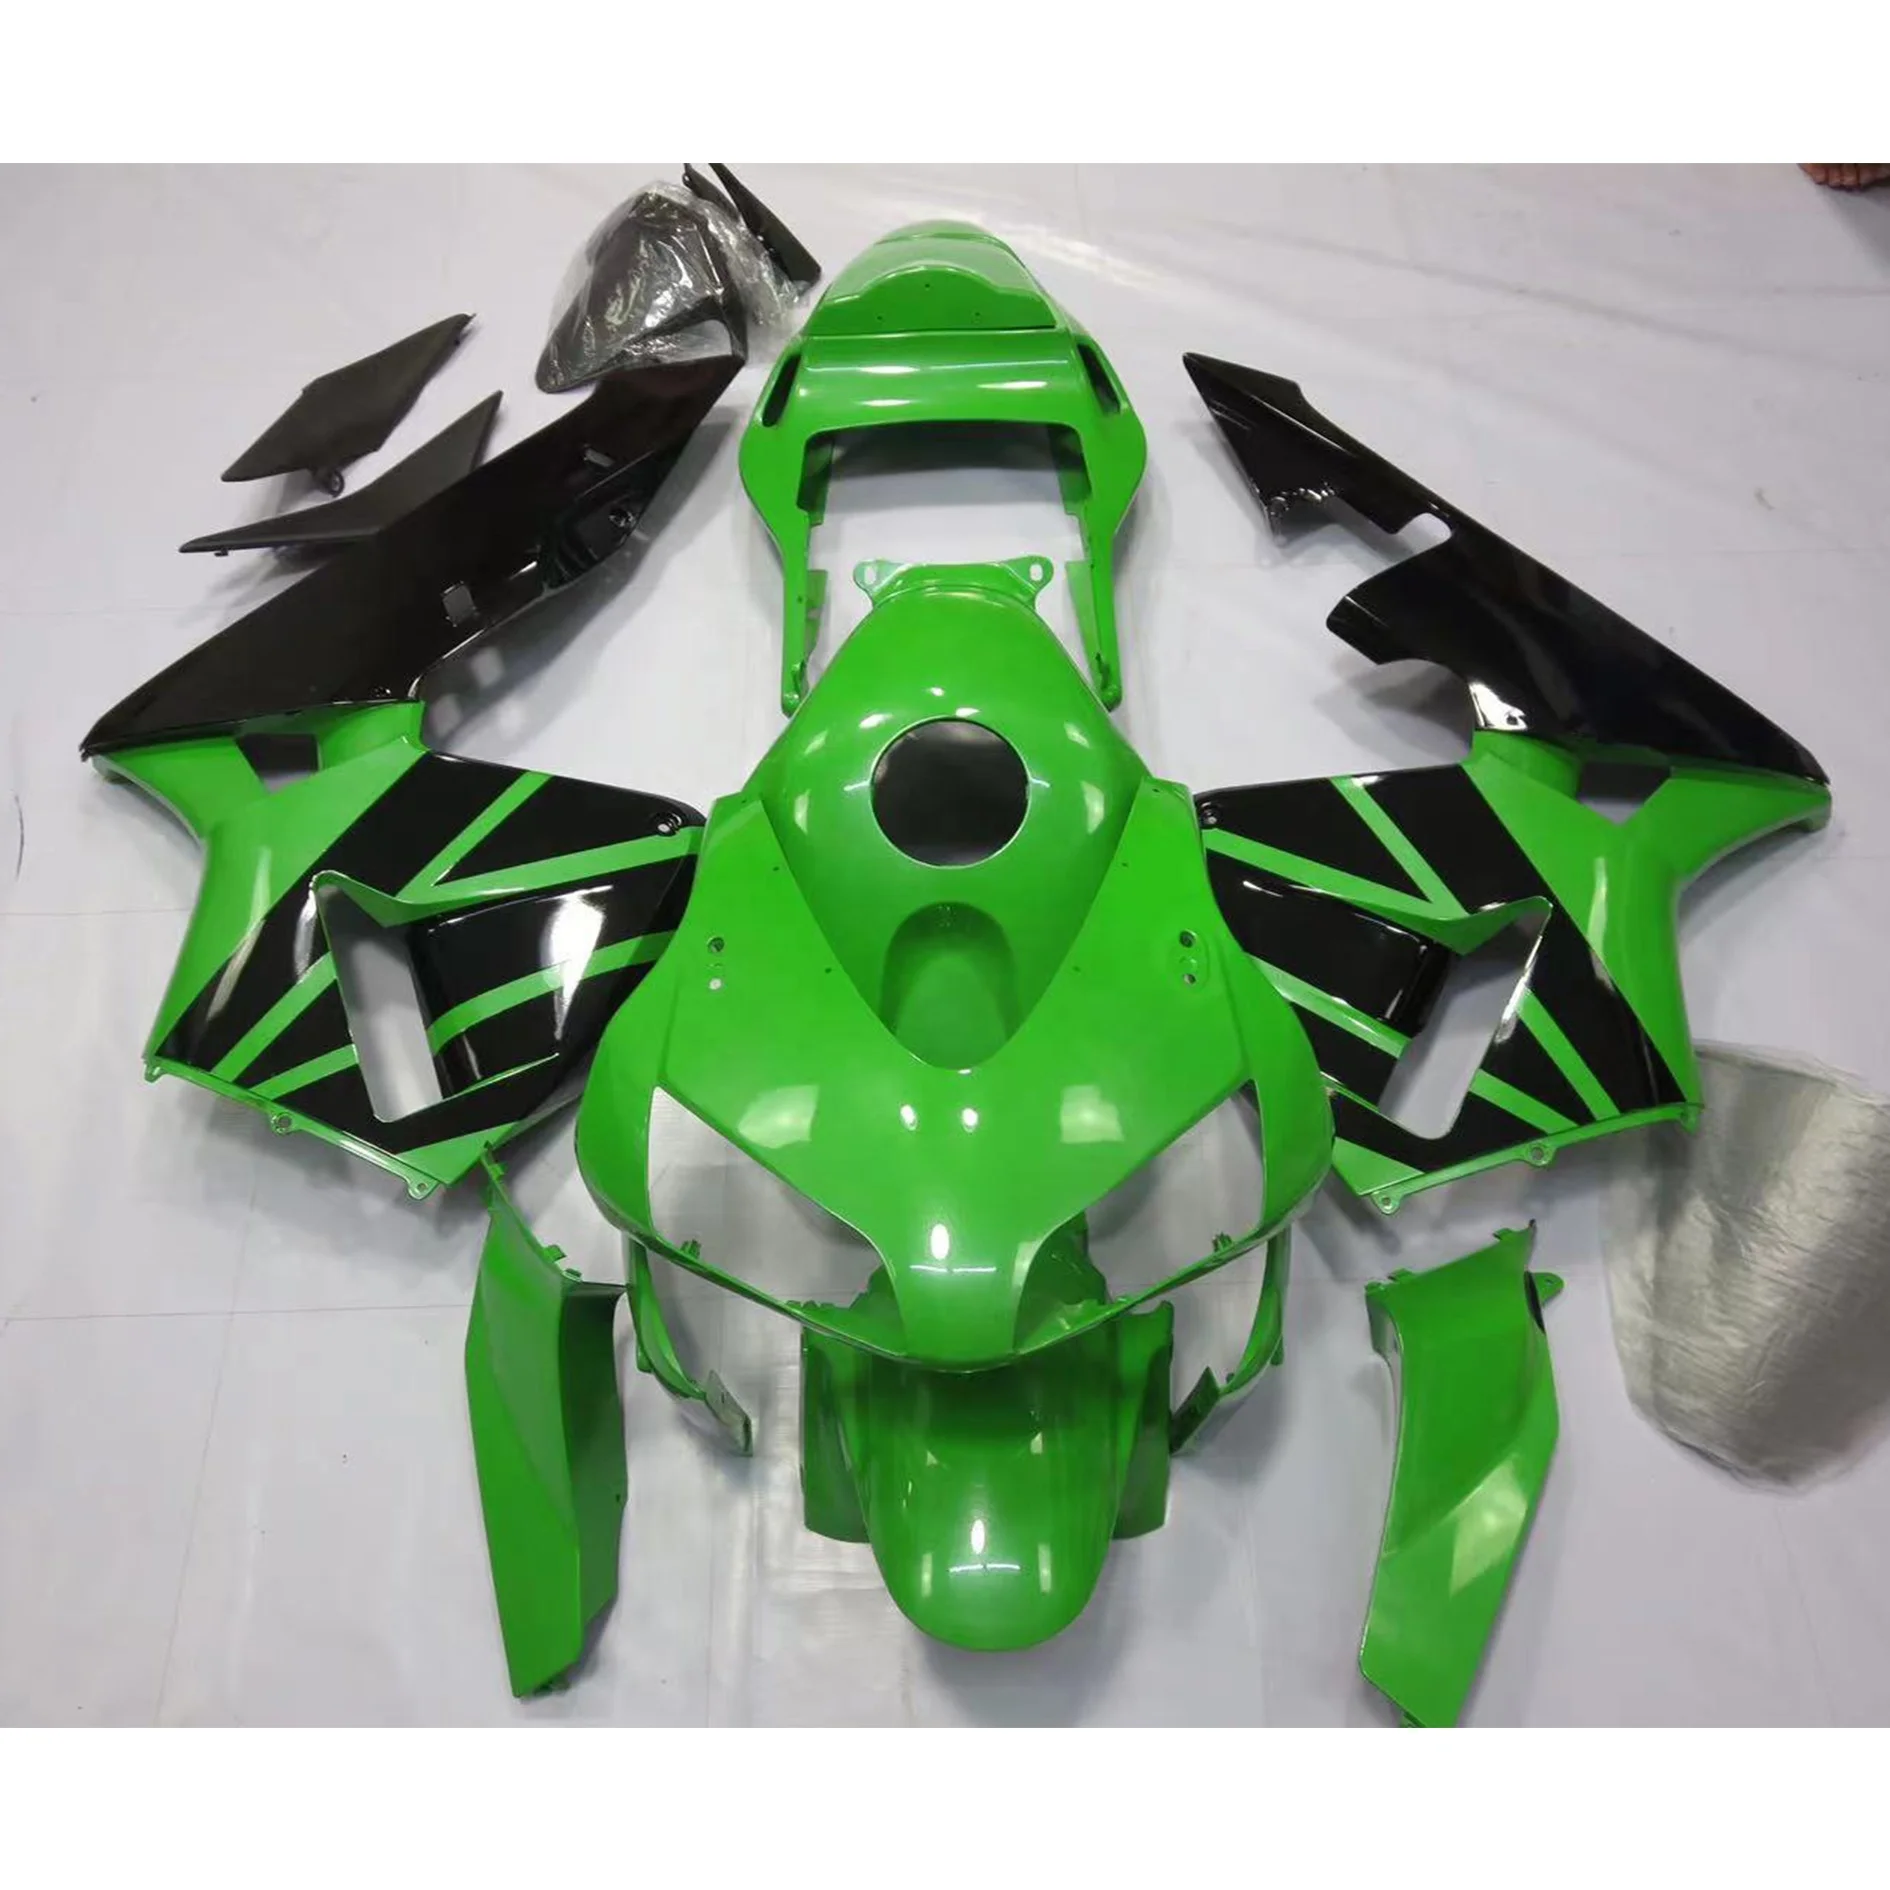 

2022 WHSC Green Black OEM Motorcycle Accessories For HONDA CBR600 RR 2003-2004 03 04 Motorcycle Body Systems Fairing Kits, Pictures shown